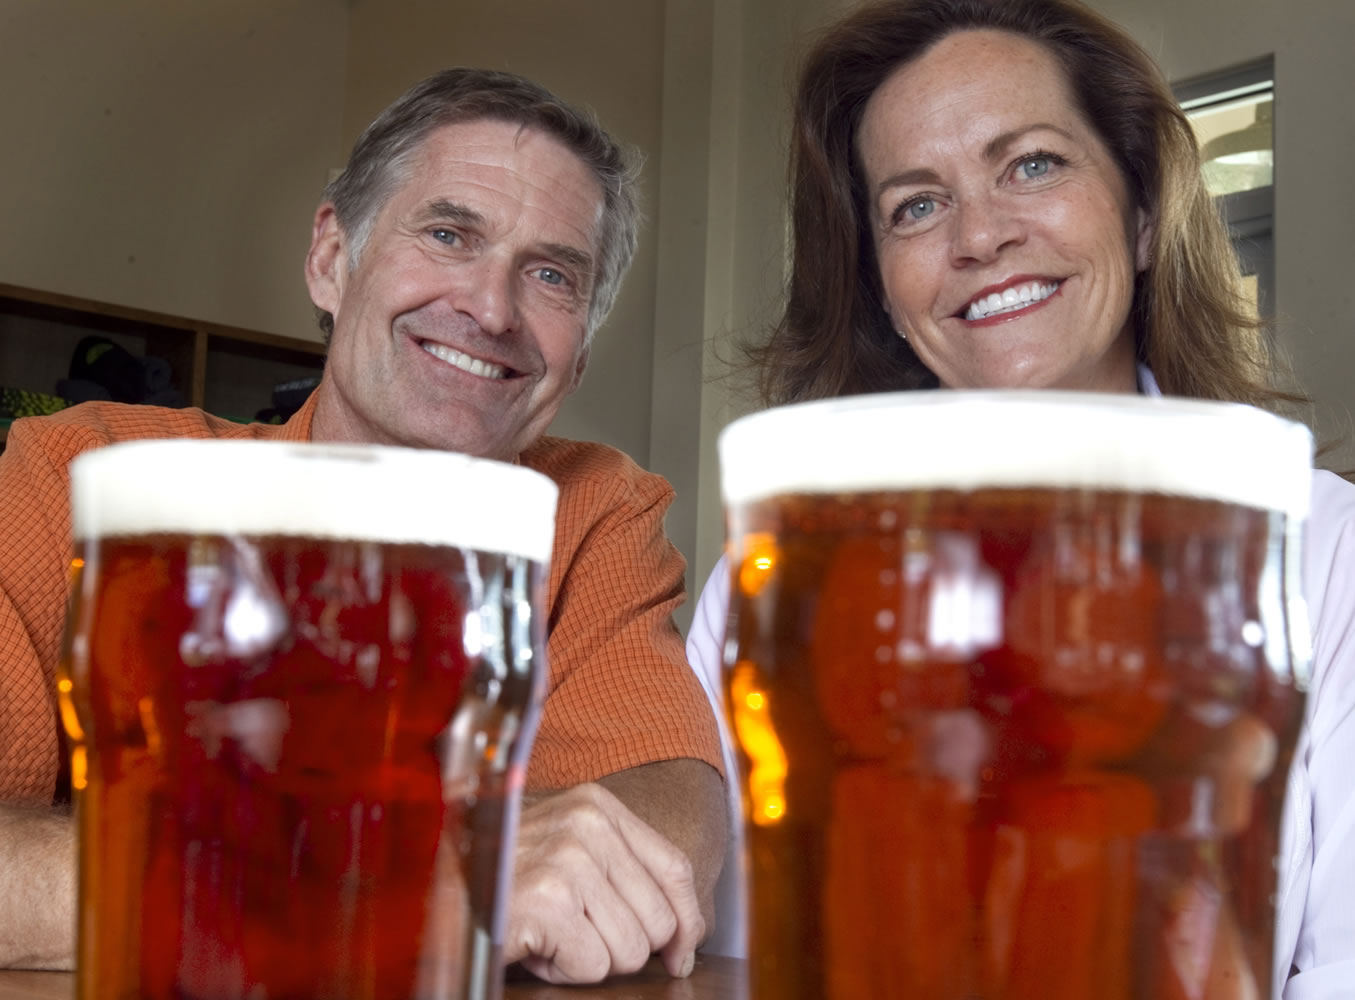 Mike and Cheryl Smith are raising money for ALS research by offering craft brewers a mixture of hops for beer.